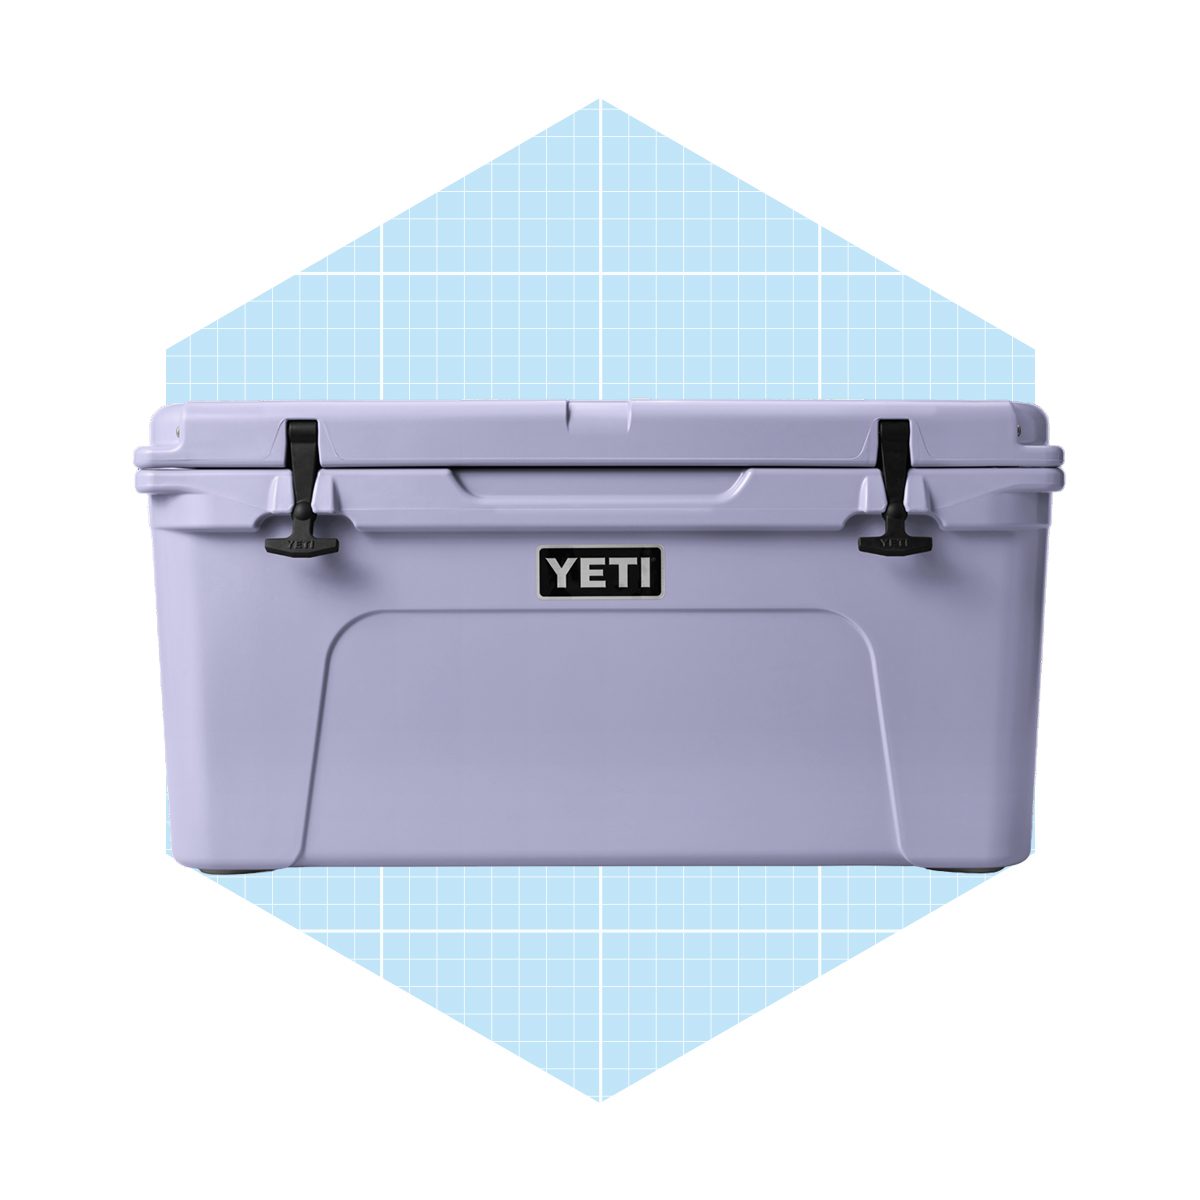 New Yeti Colors Are Here: Meet Cosmic Lilac and Camp Green